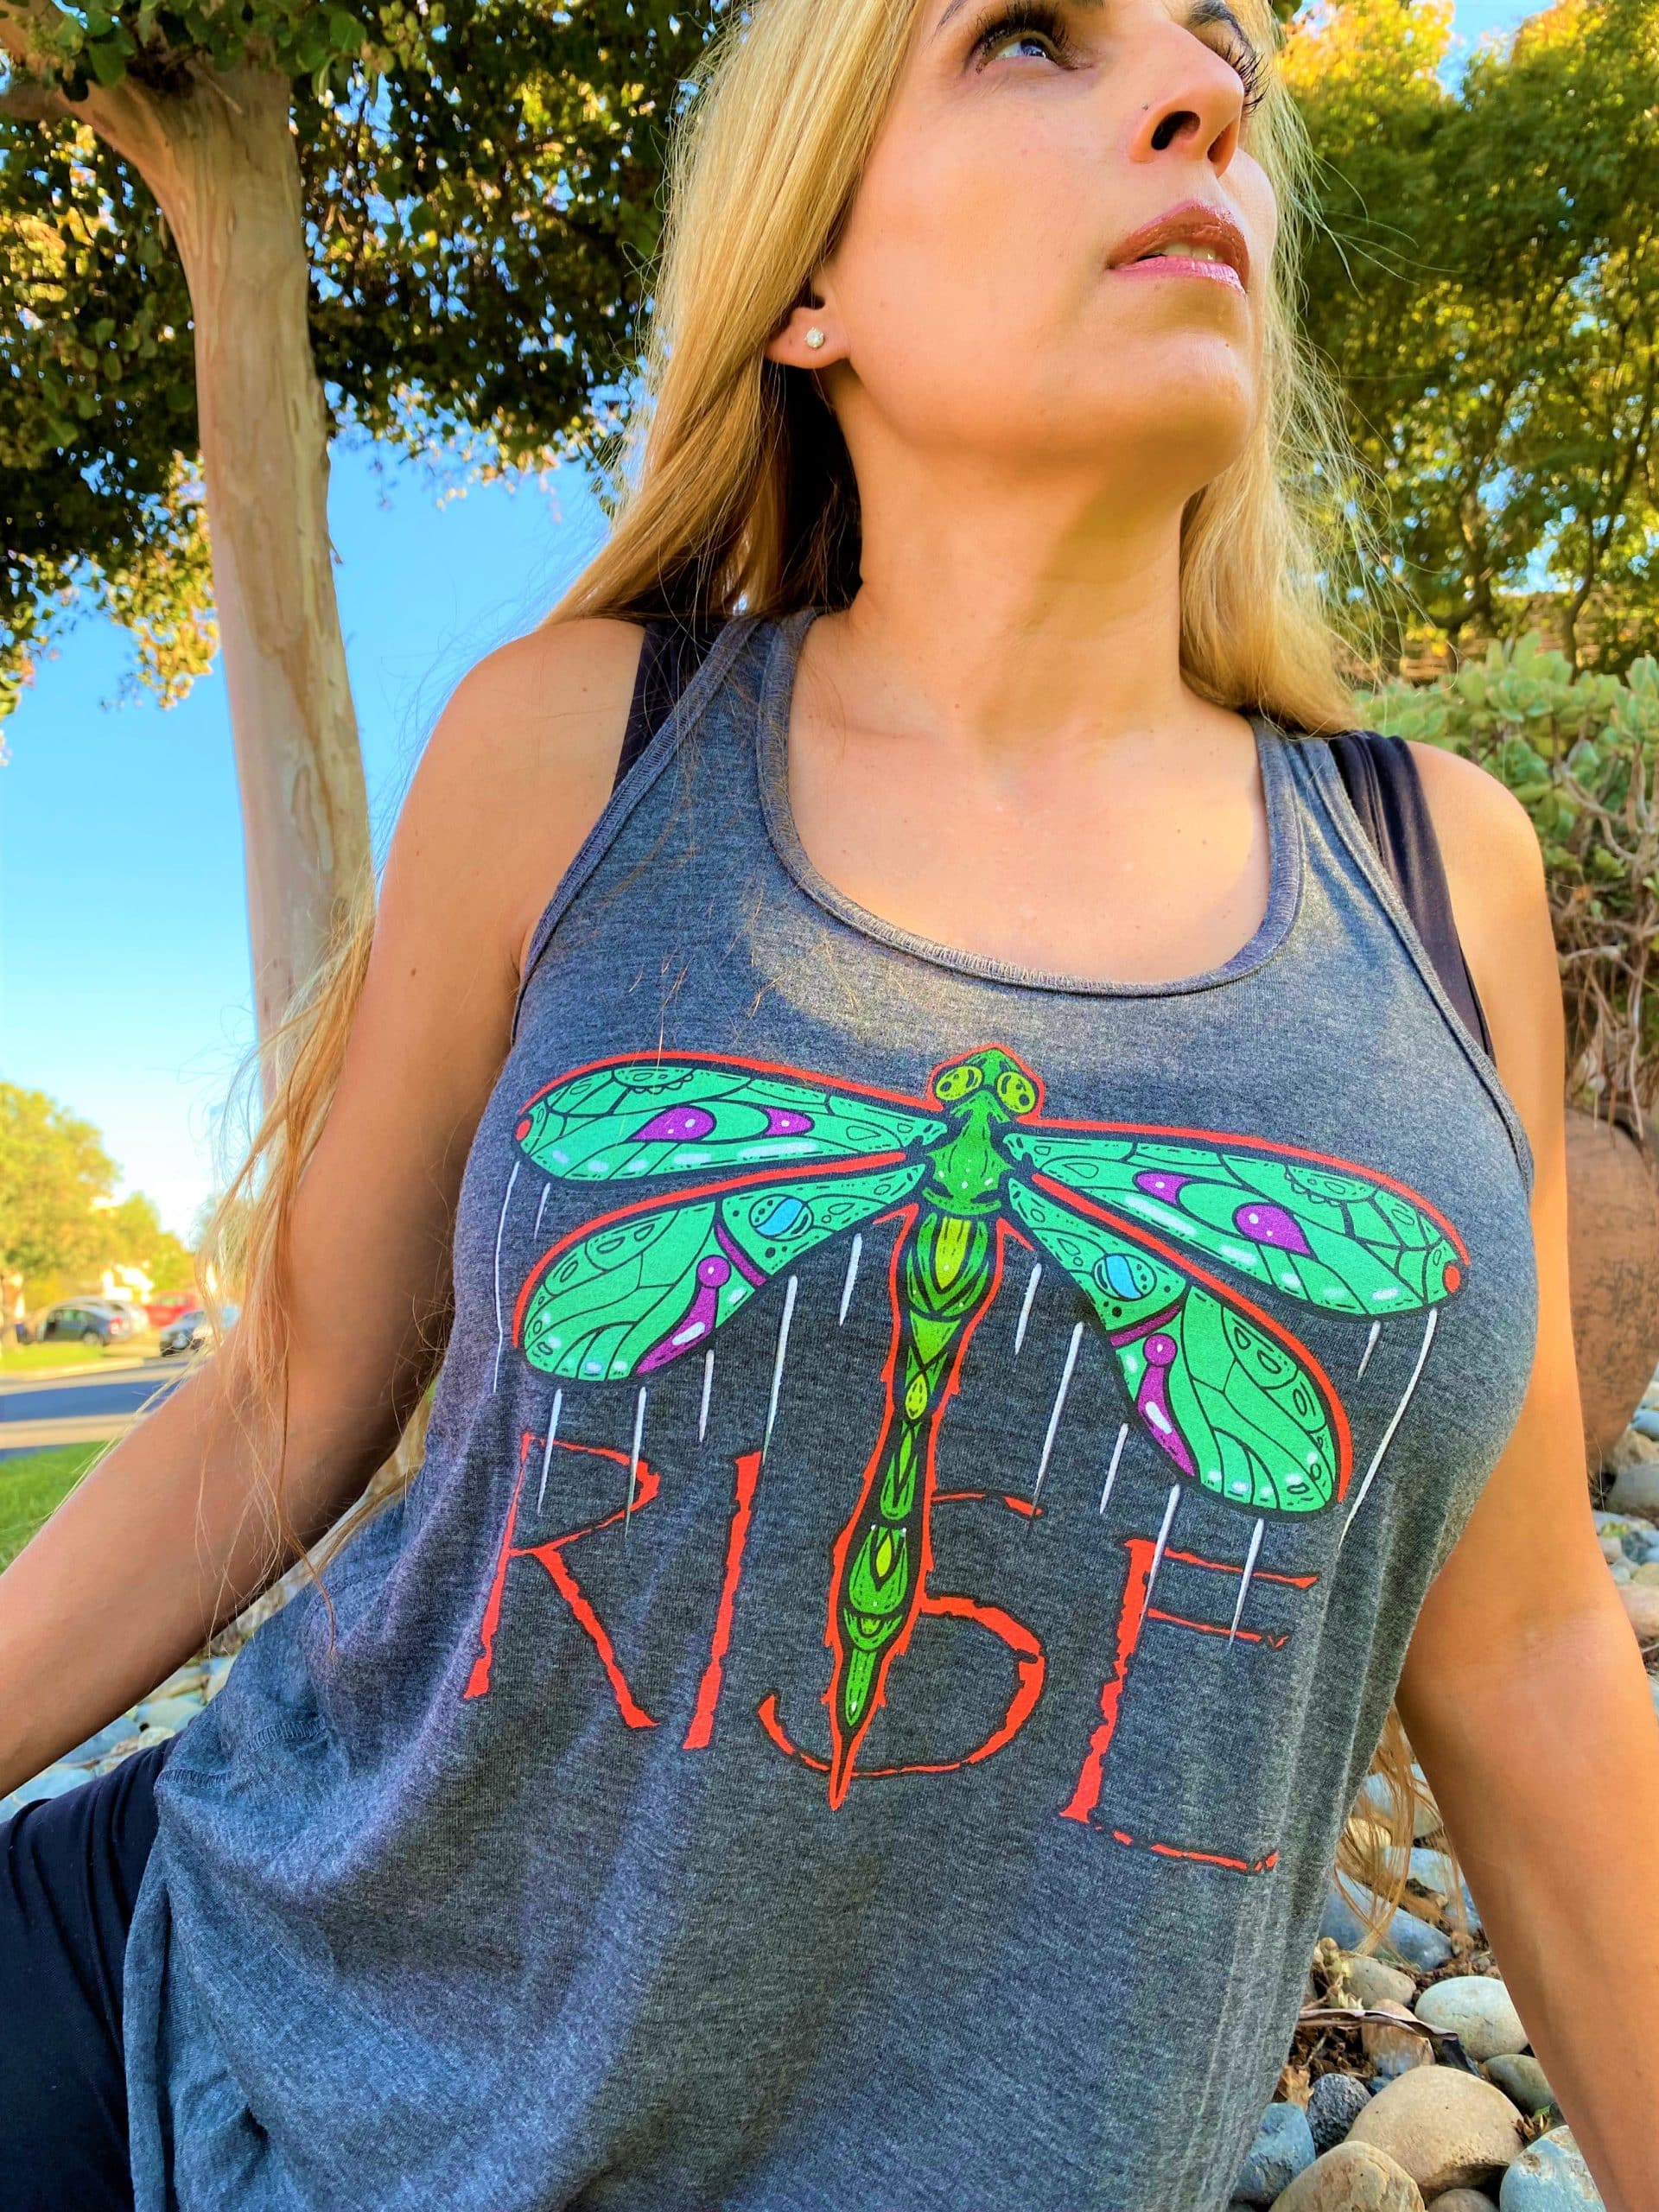 I AM Sports bra - Women's Clothing, T-Shirts, Tank Tops, Activewear,  Hoodies, Accessories, and Home and Living. Original Jesse Palmer Artwork  and affirmations that inspire to be the greatest version of oneself.